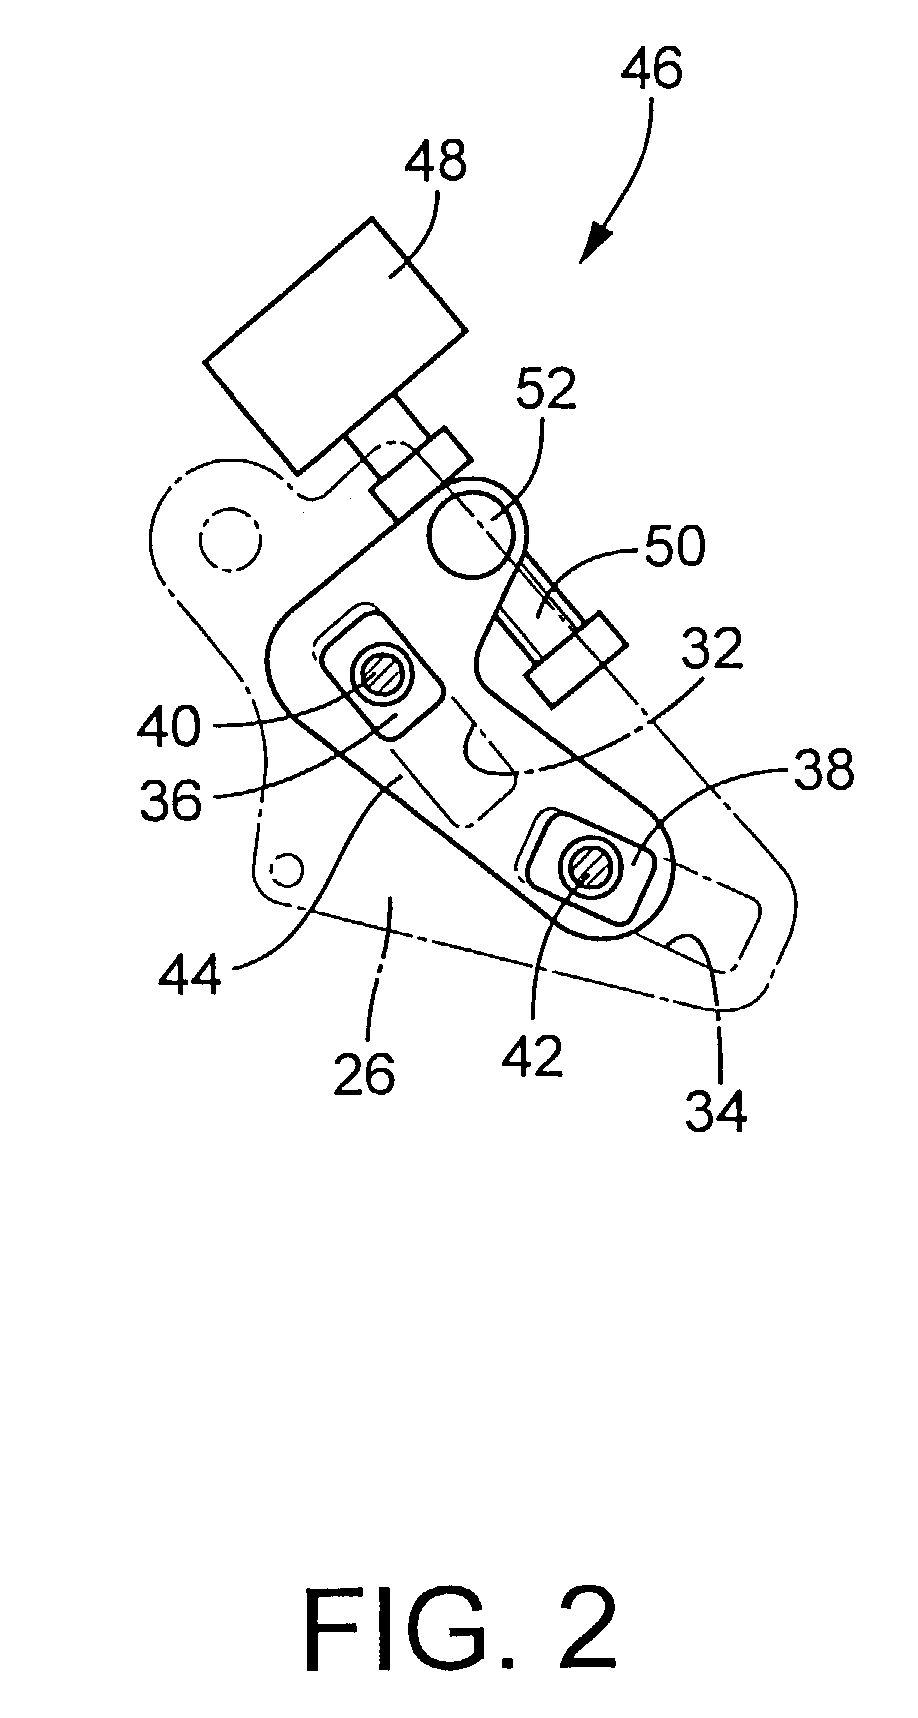 Pedal device wherein non-operated position of operating portion is adjustable